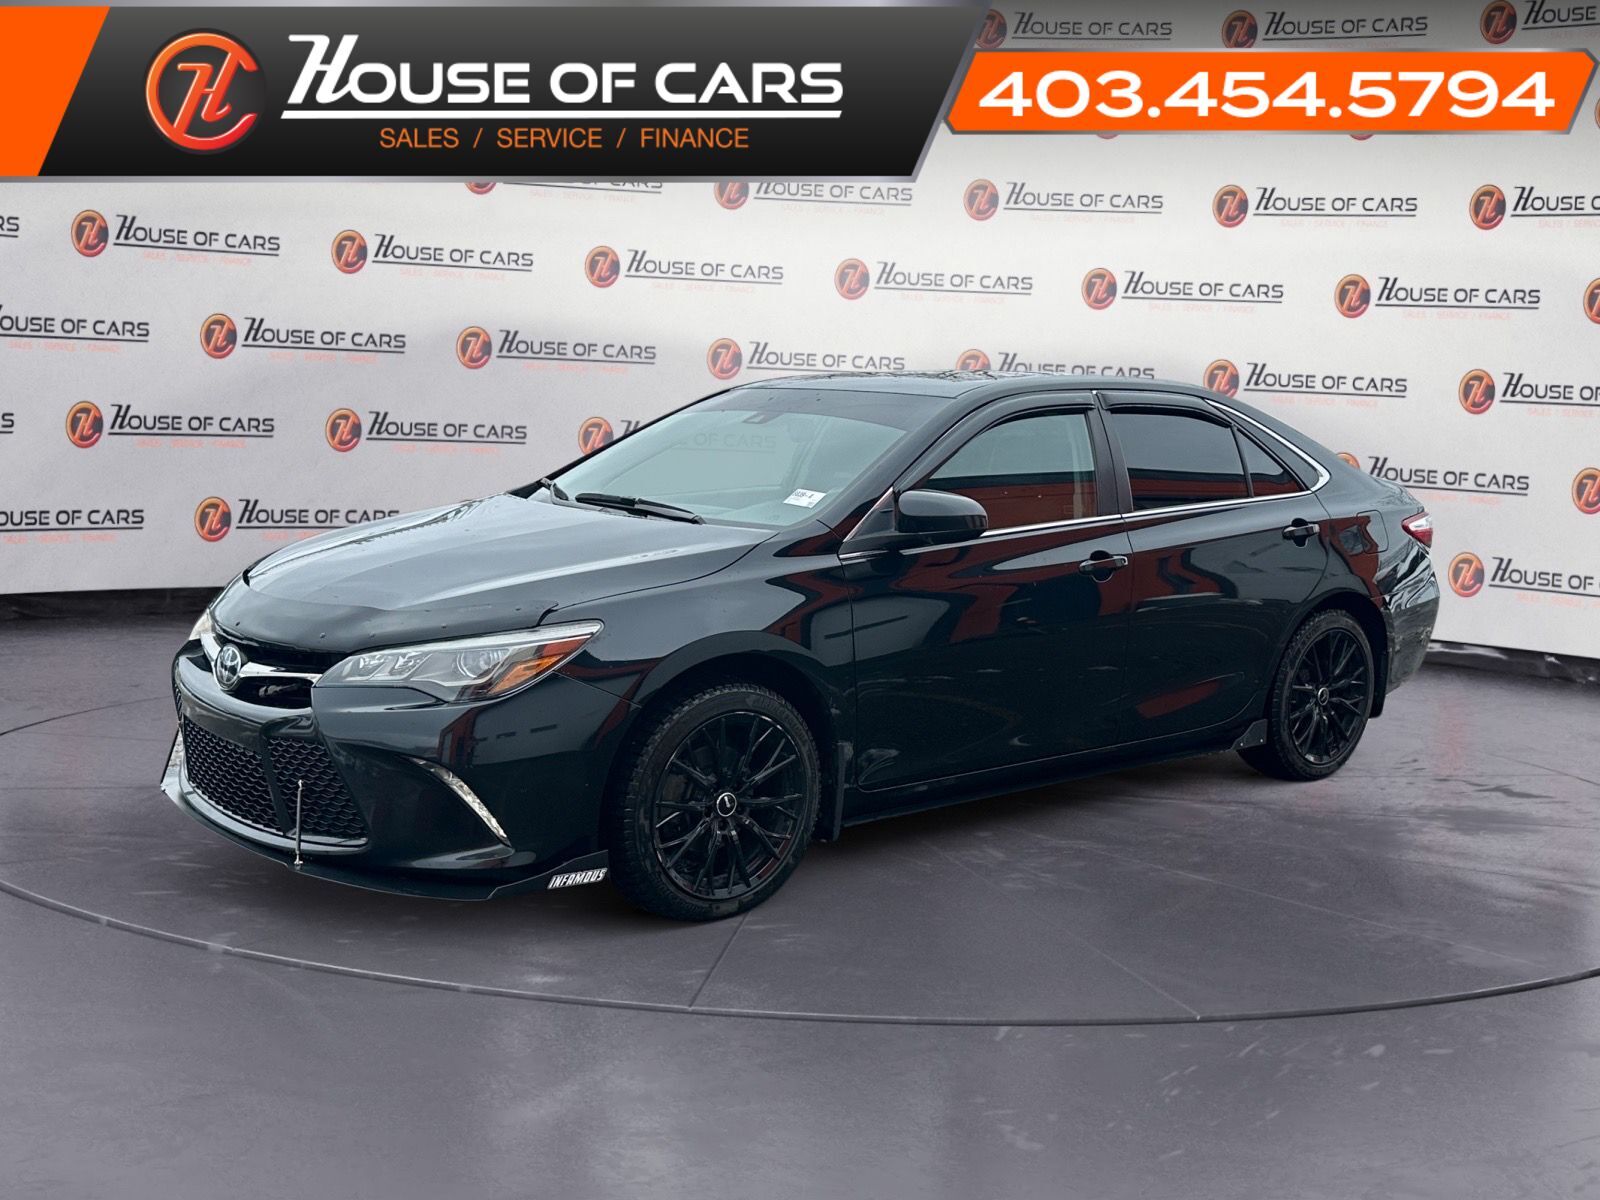 2017 Toyota Camry 4dr Sdn V6 Auto XSE